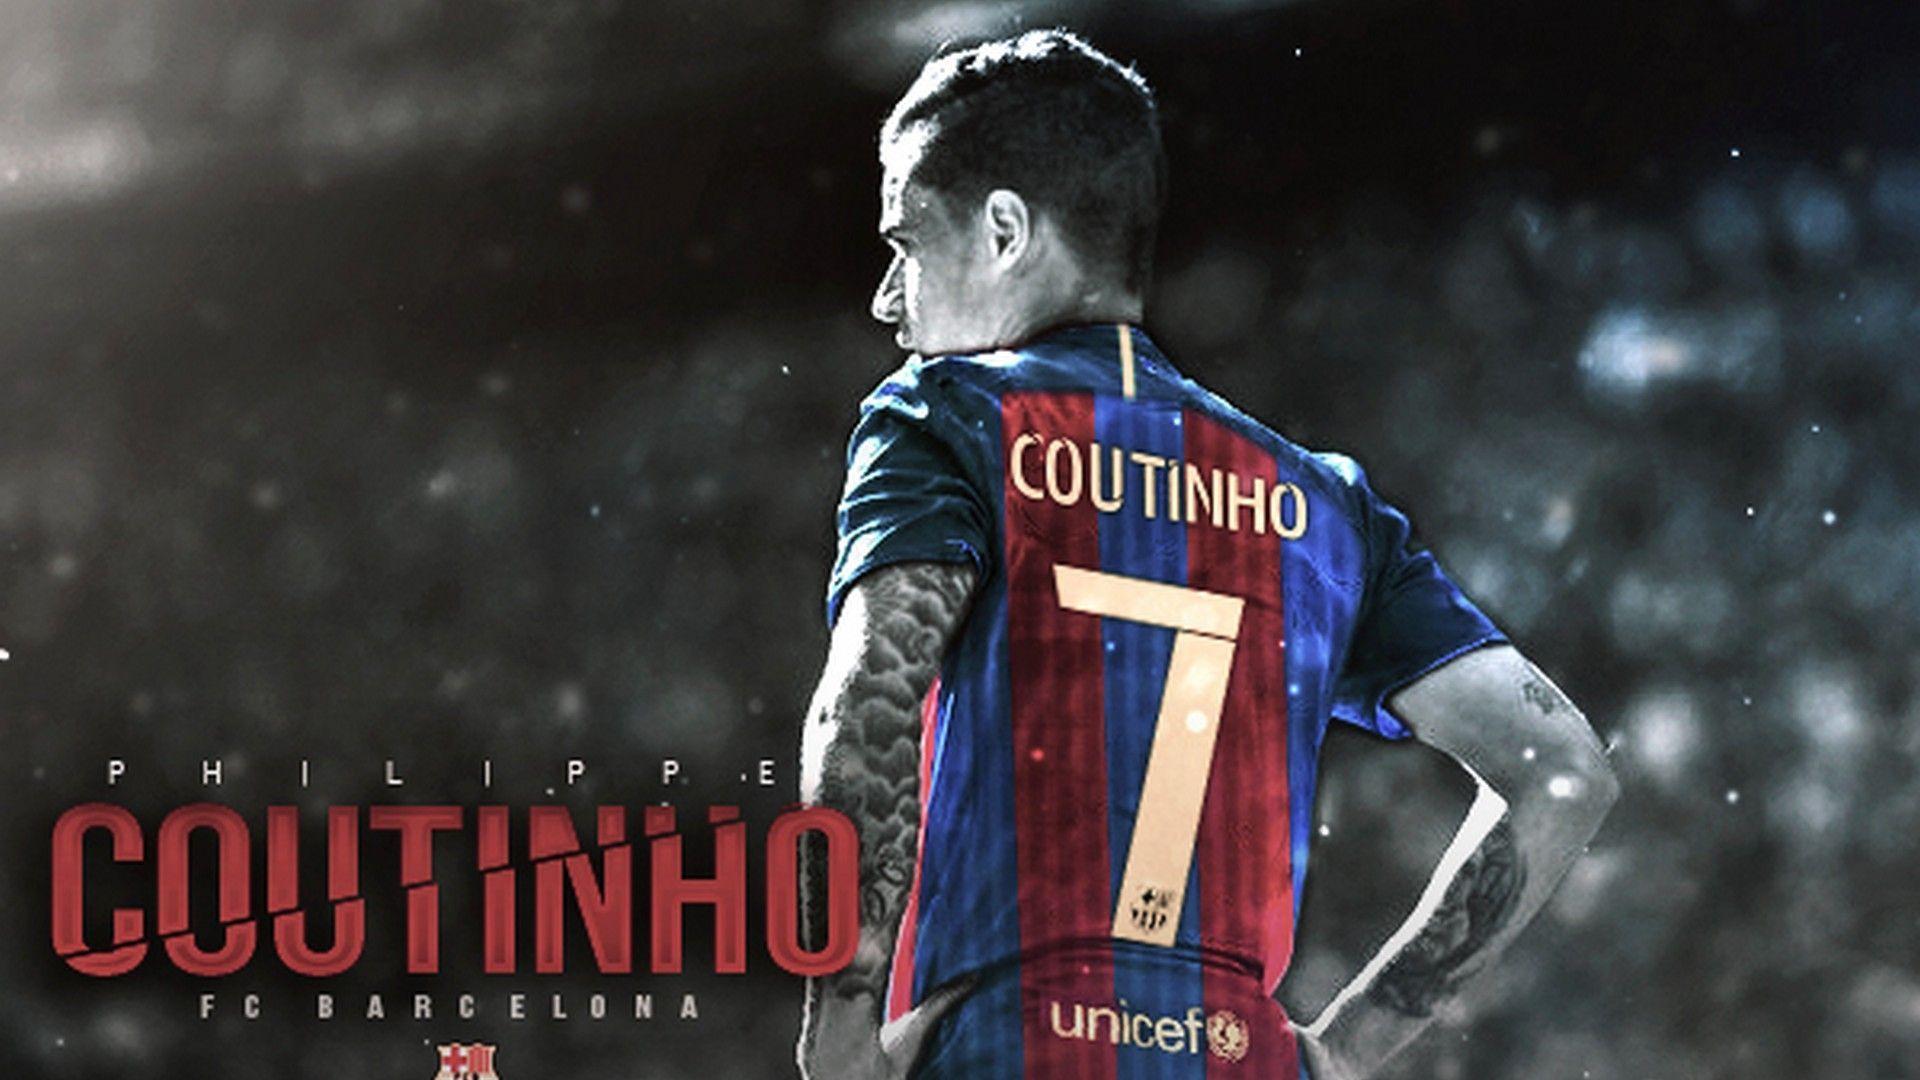 Coutinho 2018 Wallpapers - Wallpaper Cave